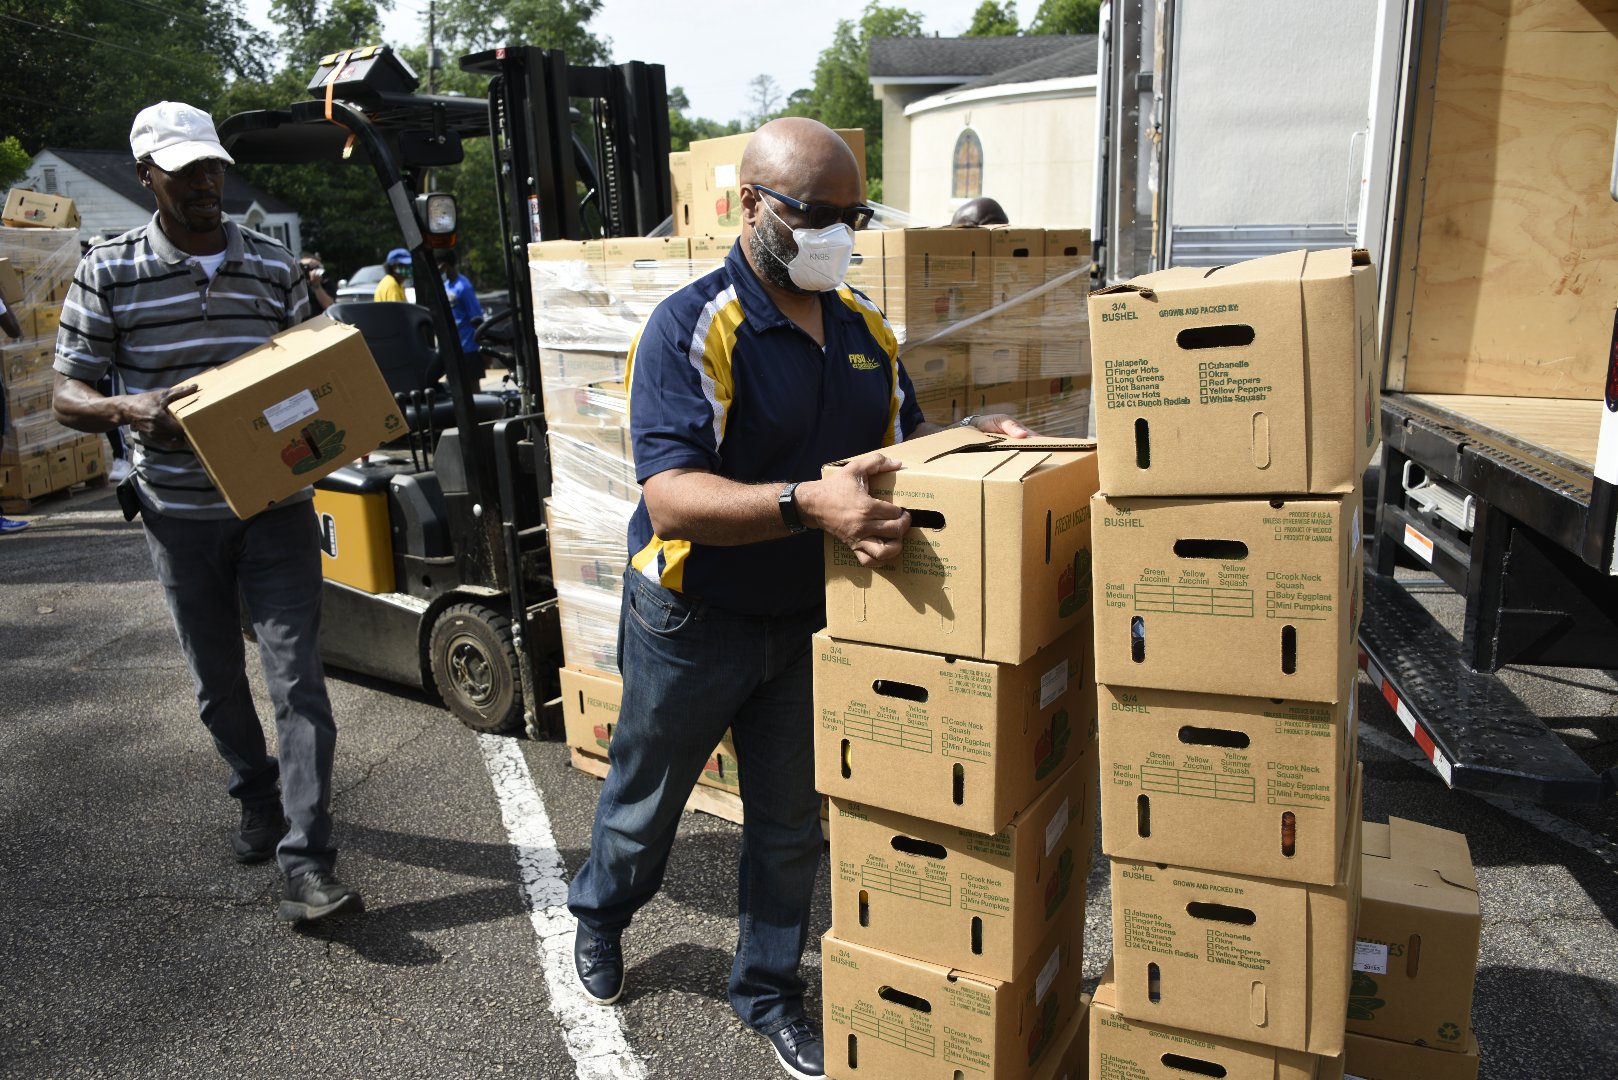 Terrence Wolfork, assistant administrator for communications, conferencing and technology, distributes food from the U.S. Department of Agriculture Farmers to Families Food Box Program in Americus.